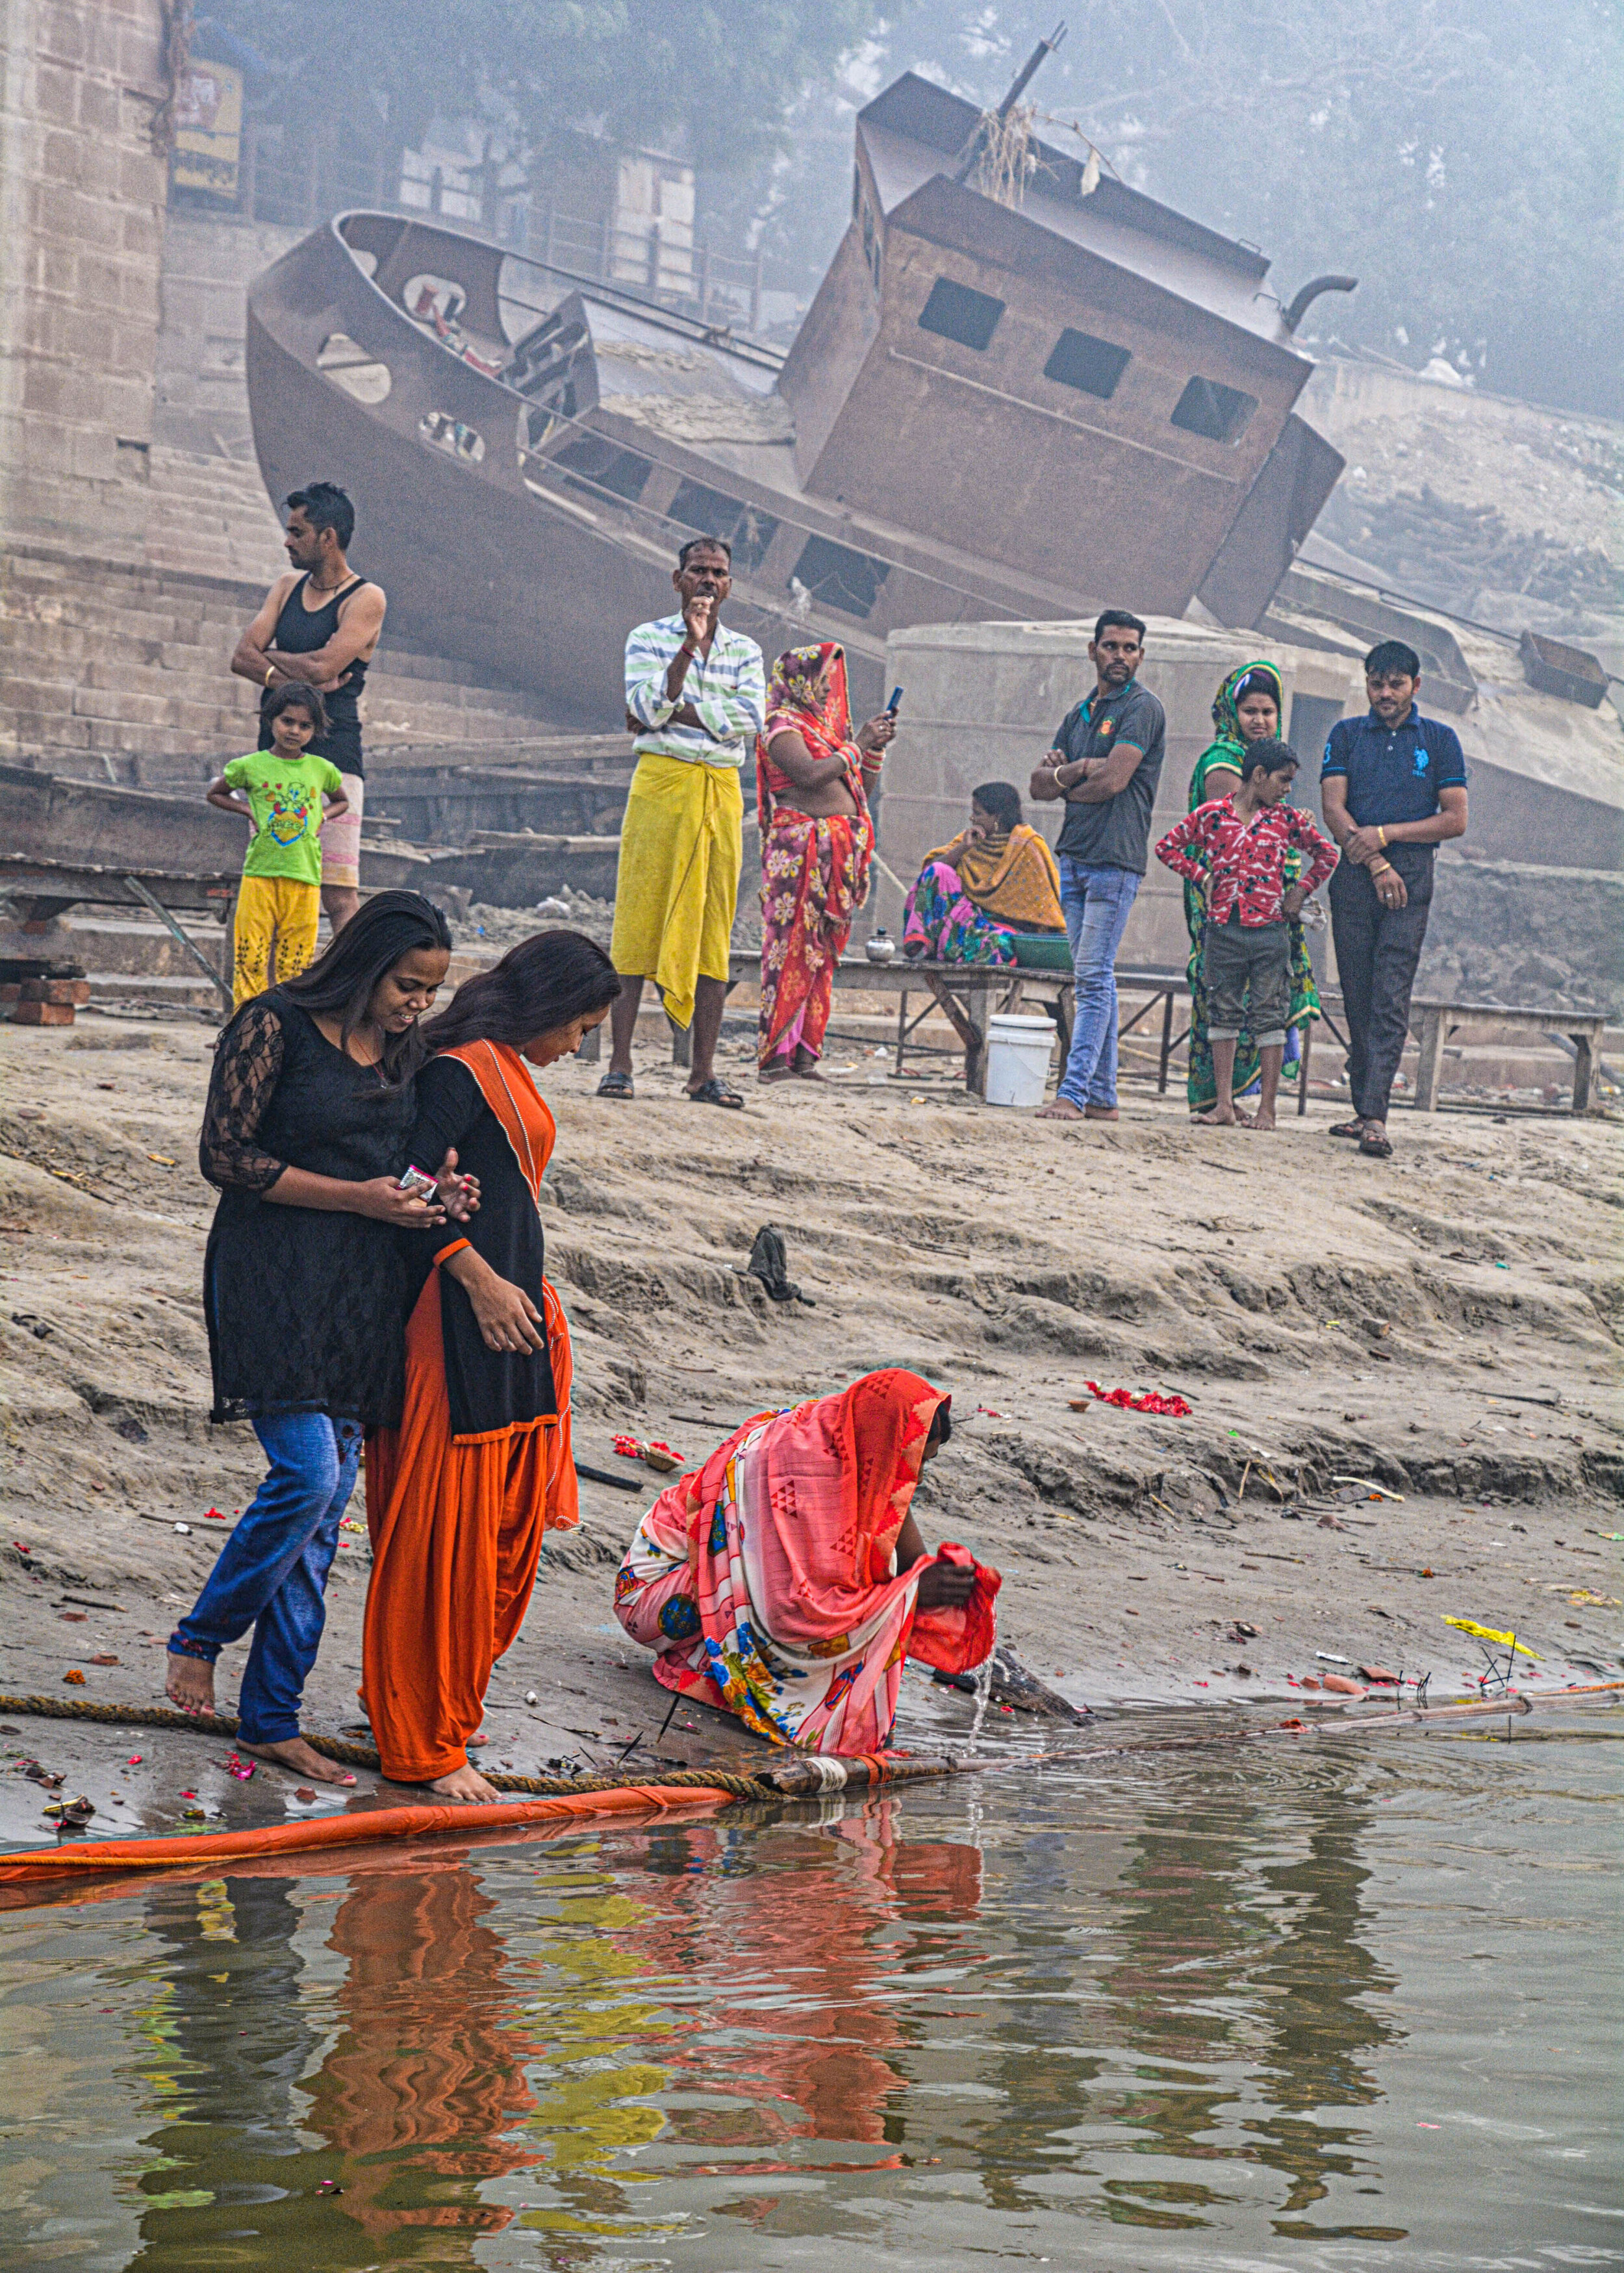 Beached Boat on the Ganges.jpg